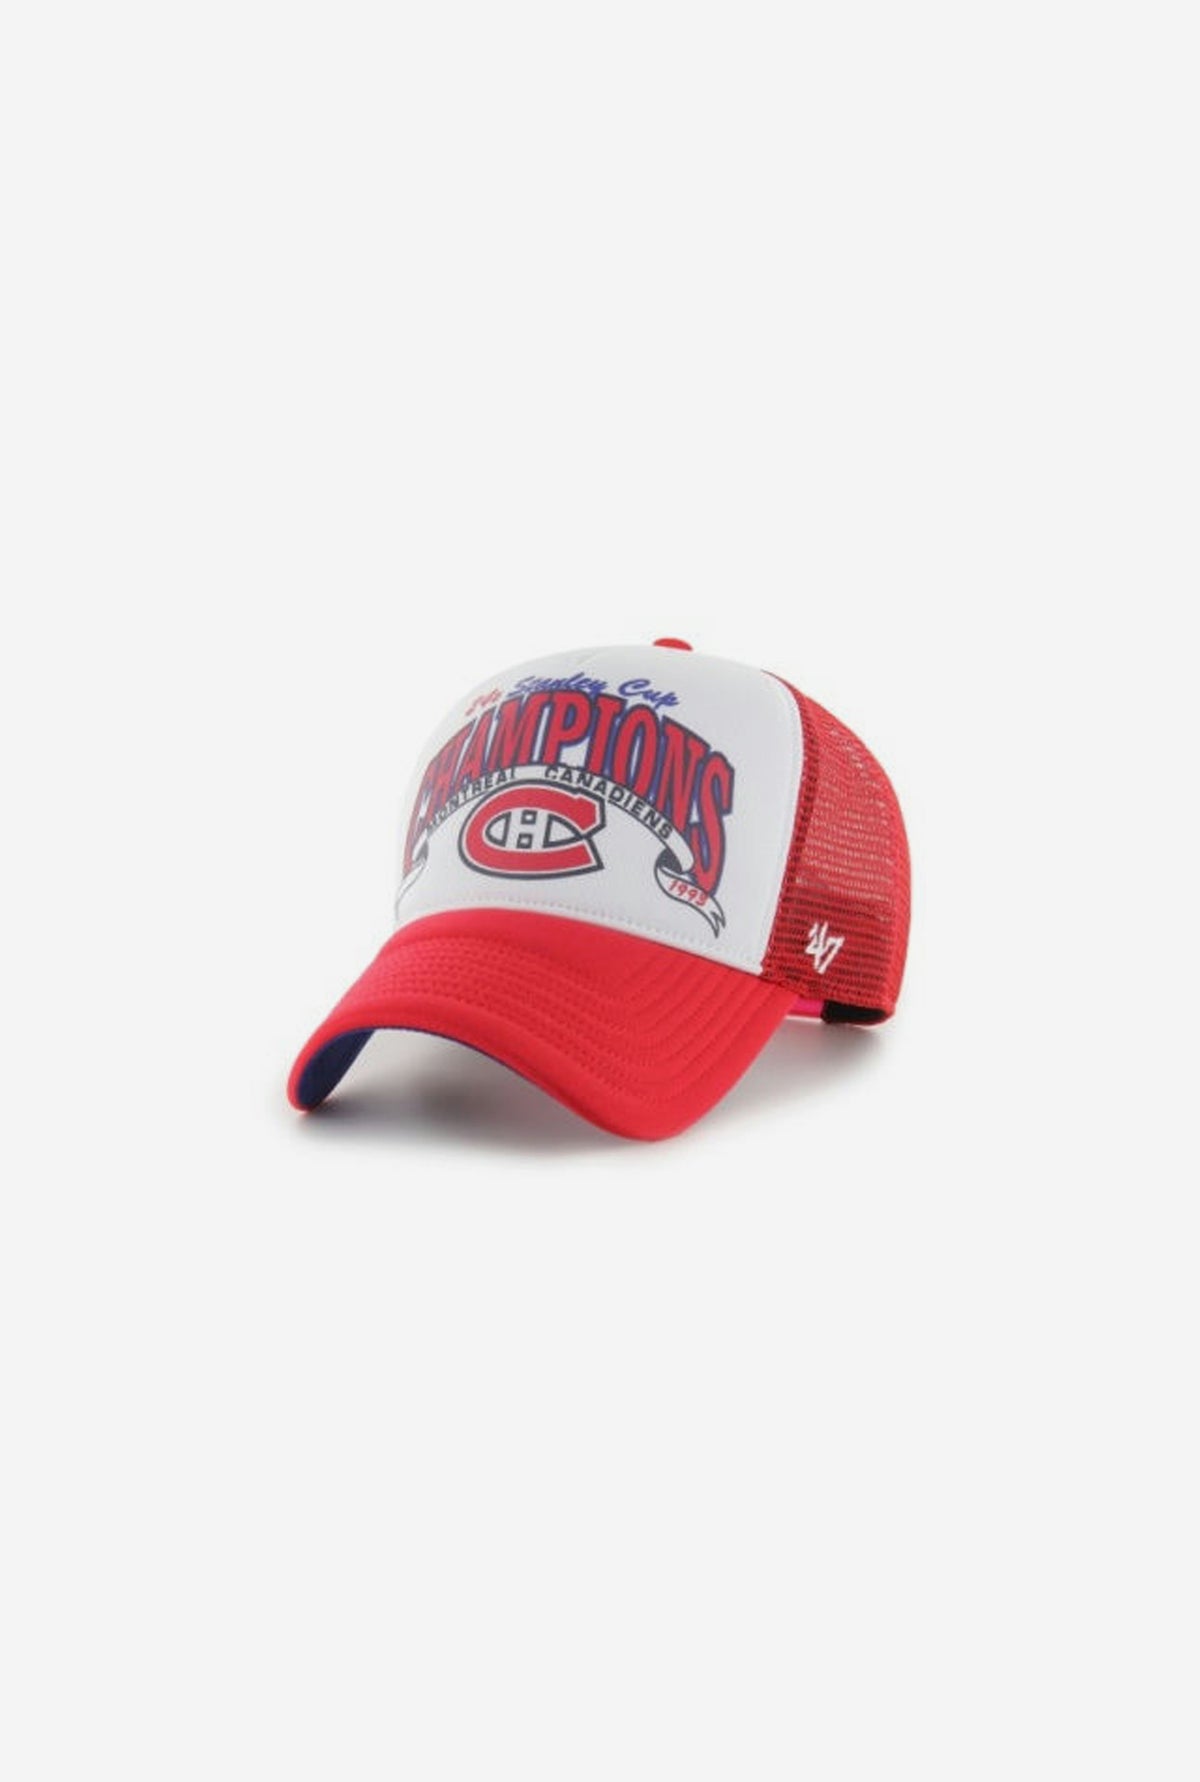 Montreal Canadiens Foam Champ Offside DT Hat